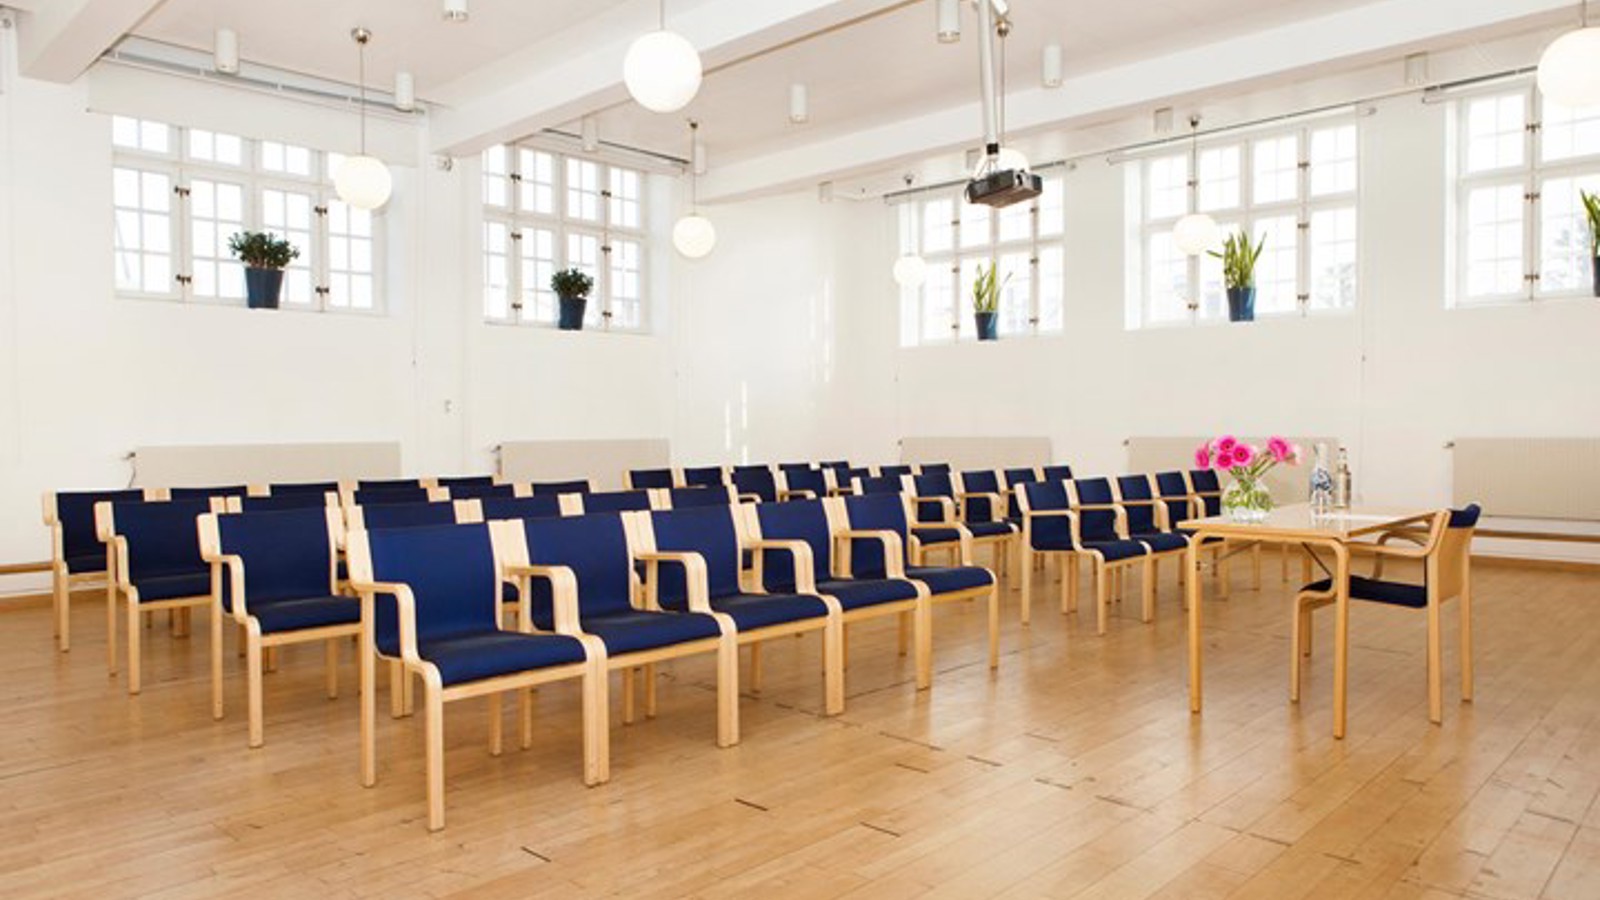 Bright conference room with cinema seating, many windows and blue chairs